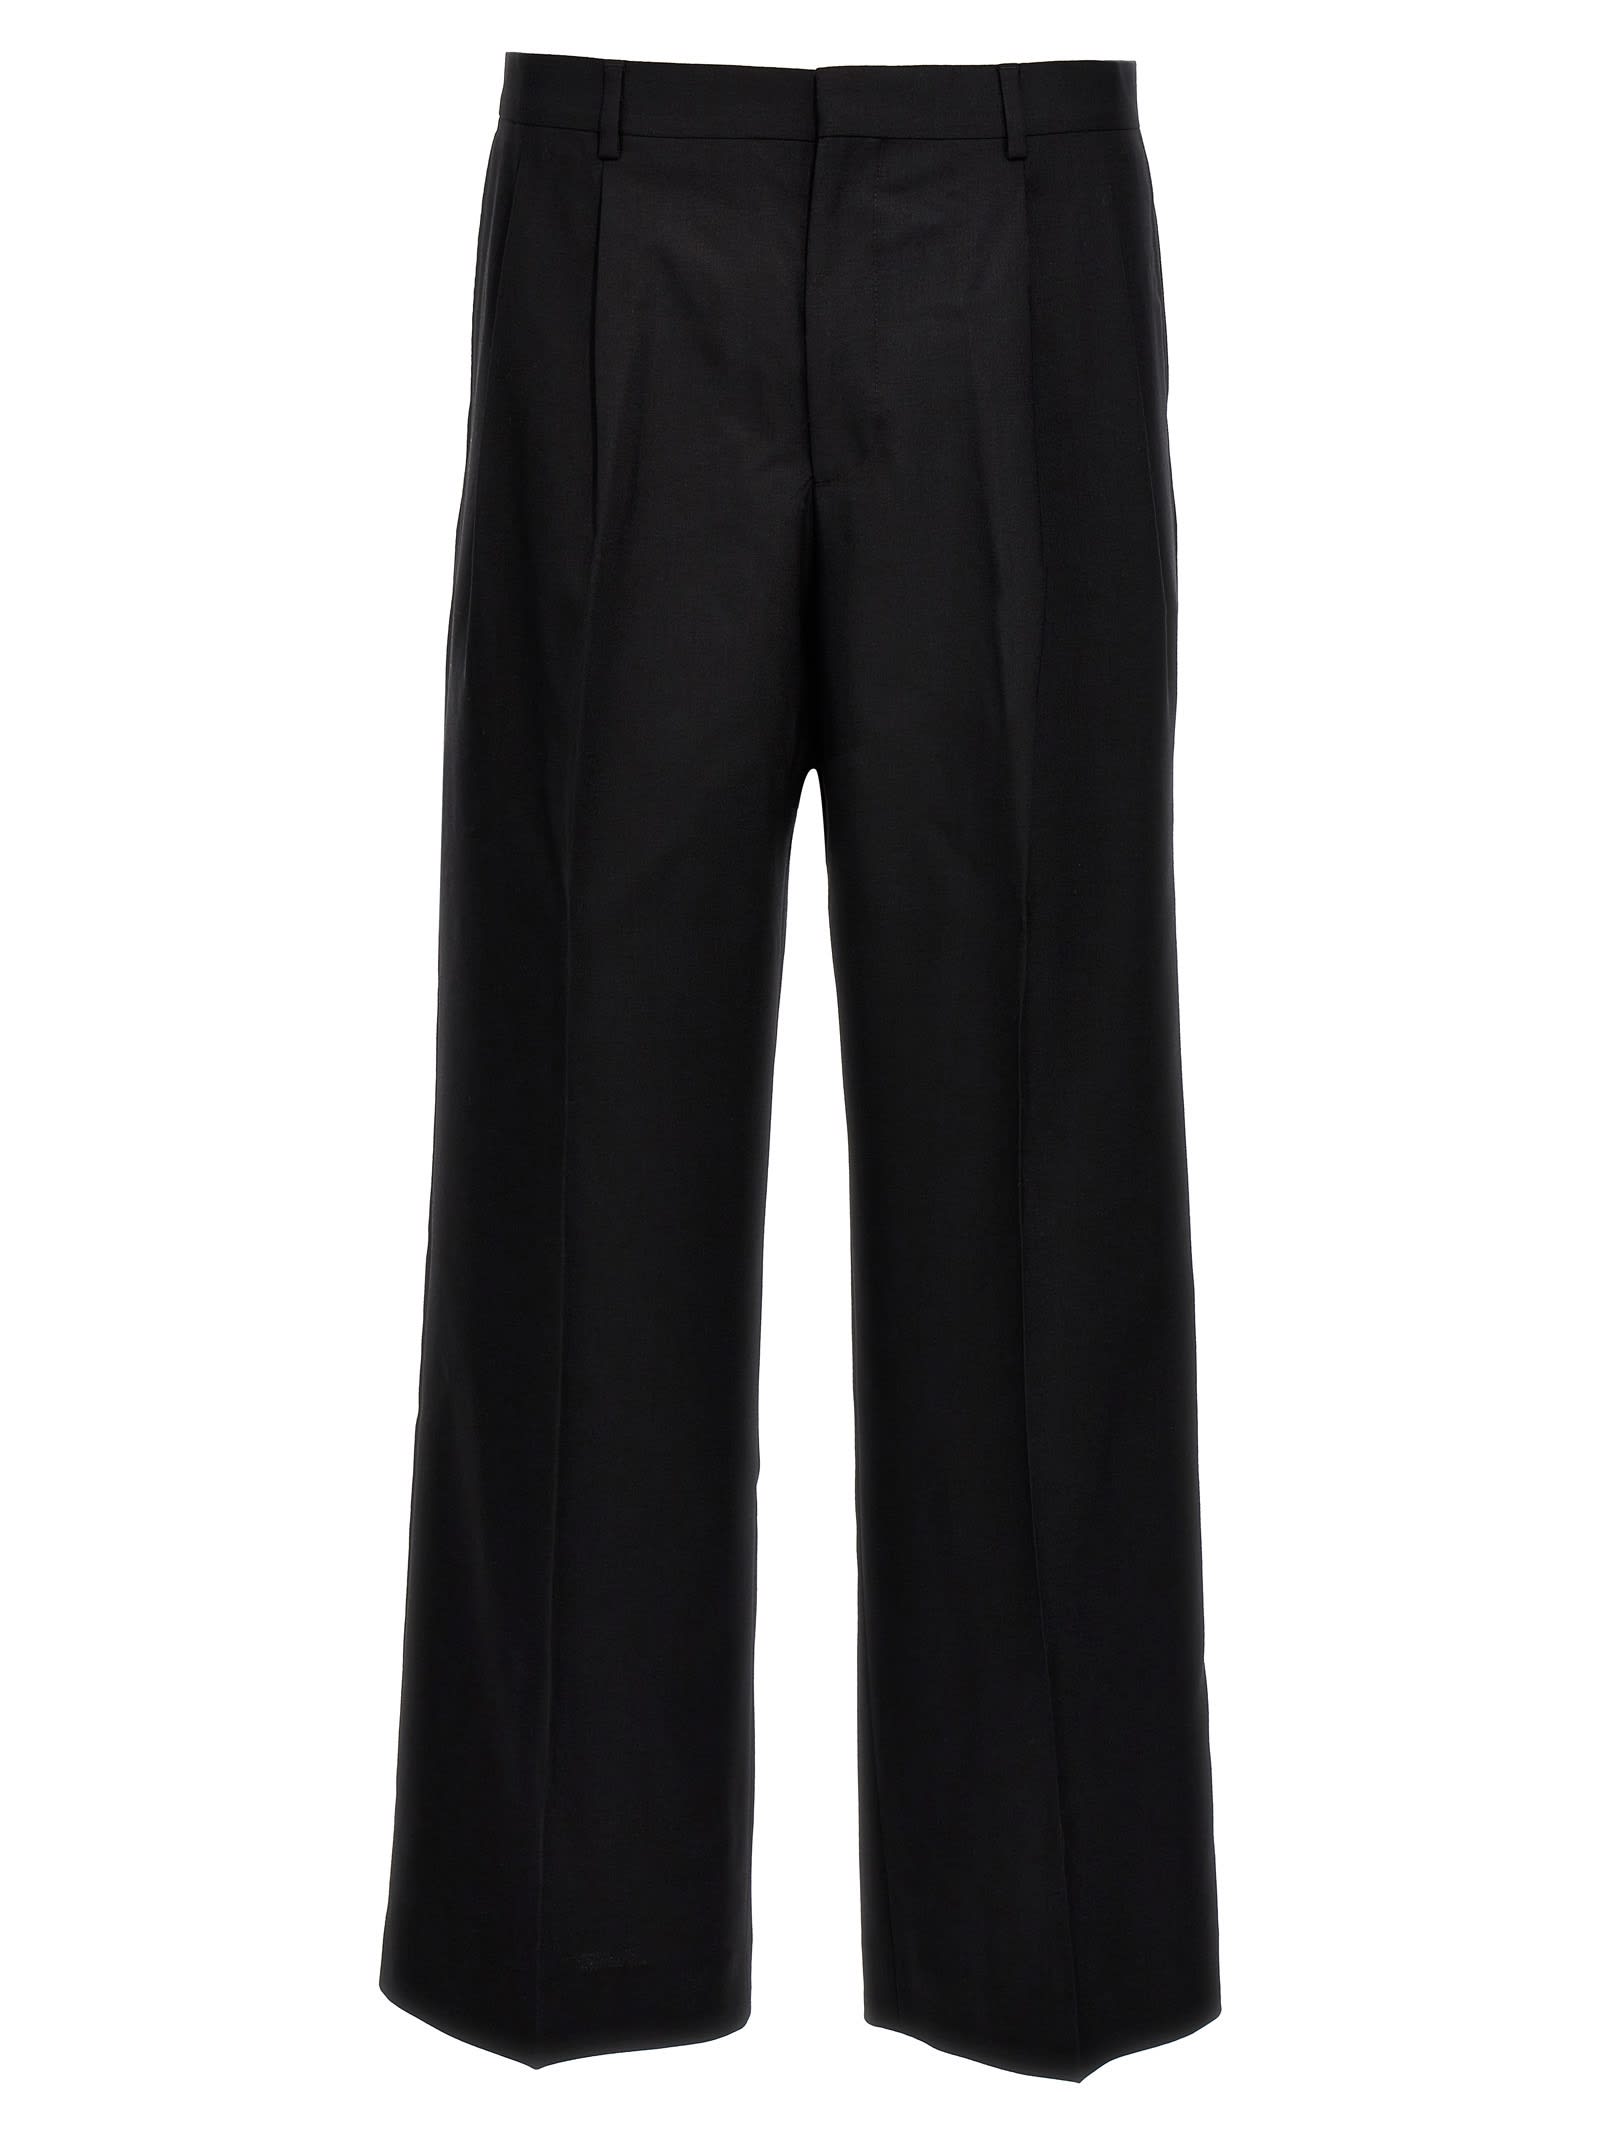 SUNFLOWER WIDE PLEATED PANTS